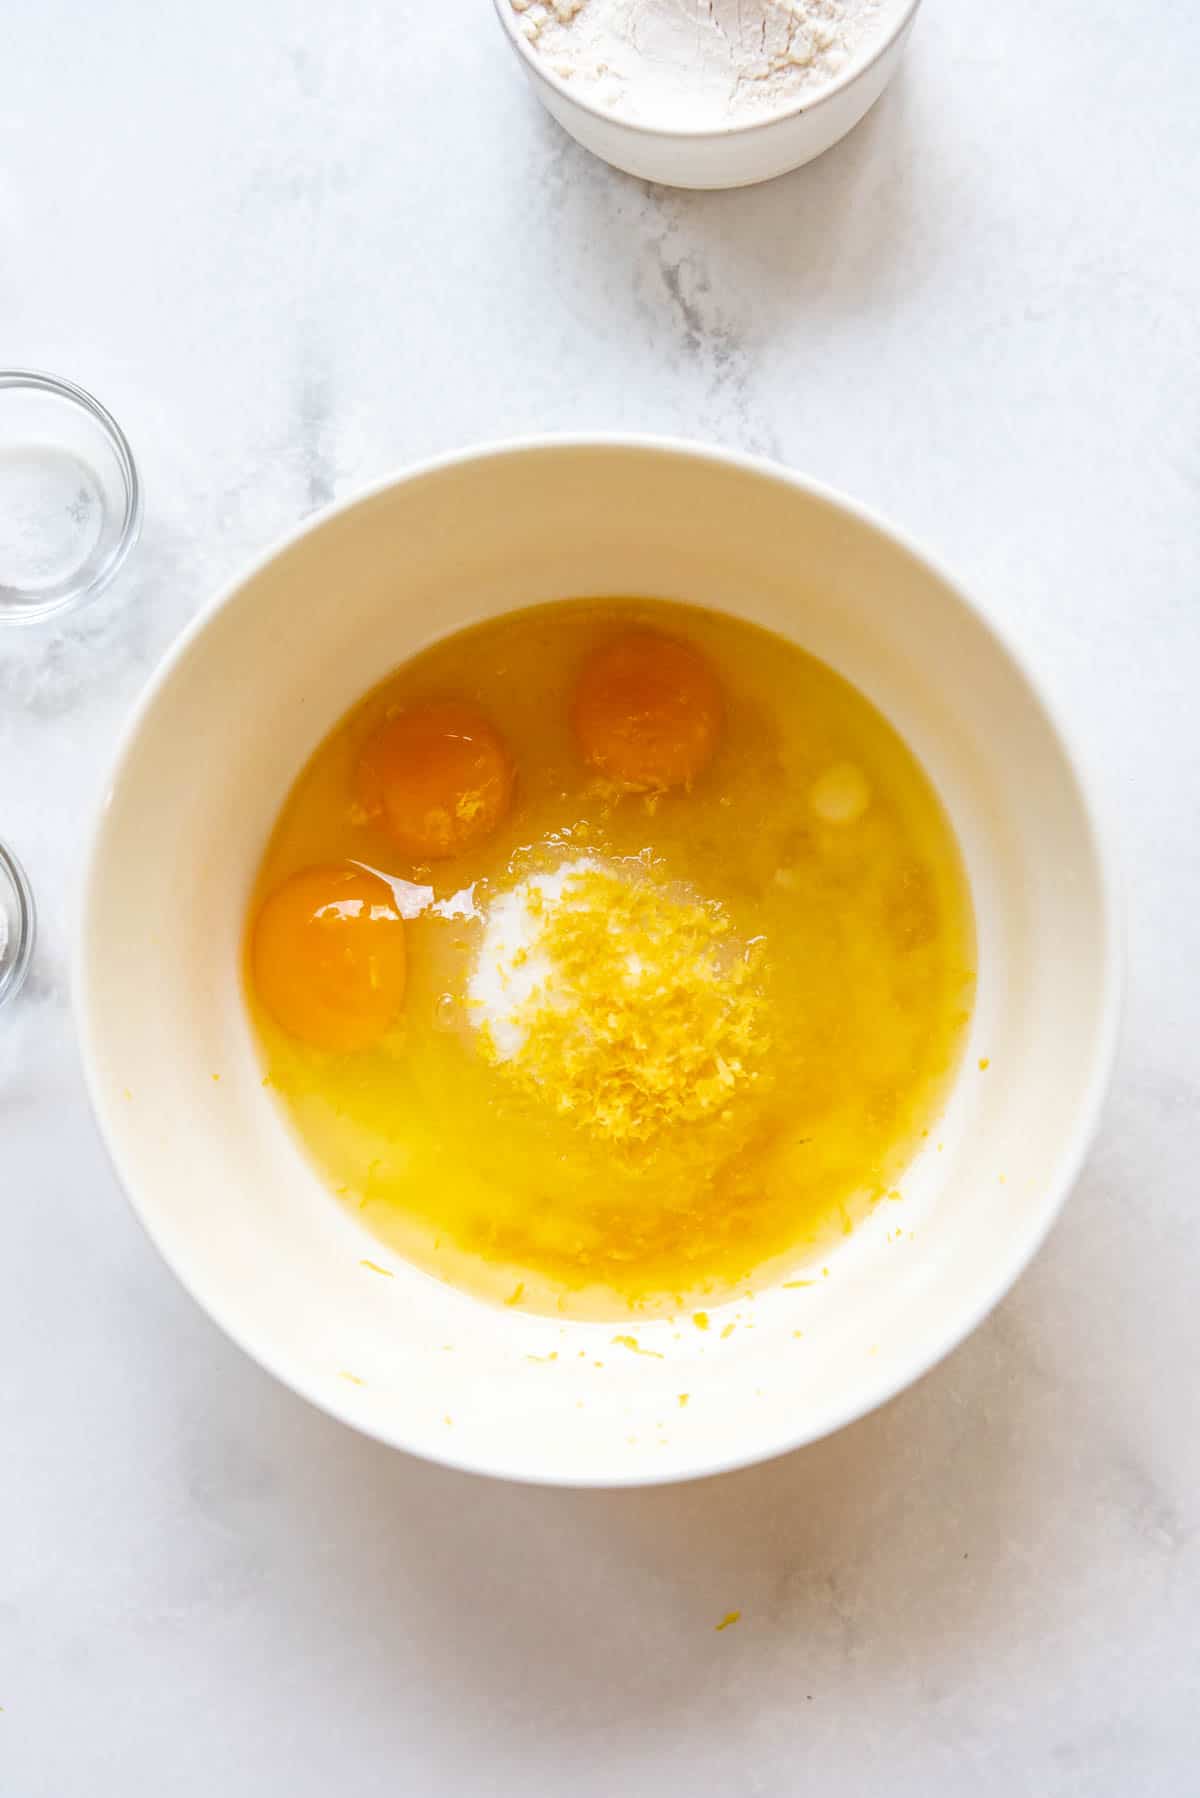 Combining granulated sugar, eggs, lemon juice, lemon zest, and melted butter in a large mixing bowl.